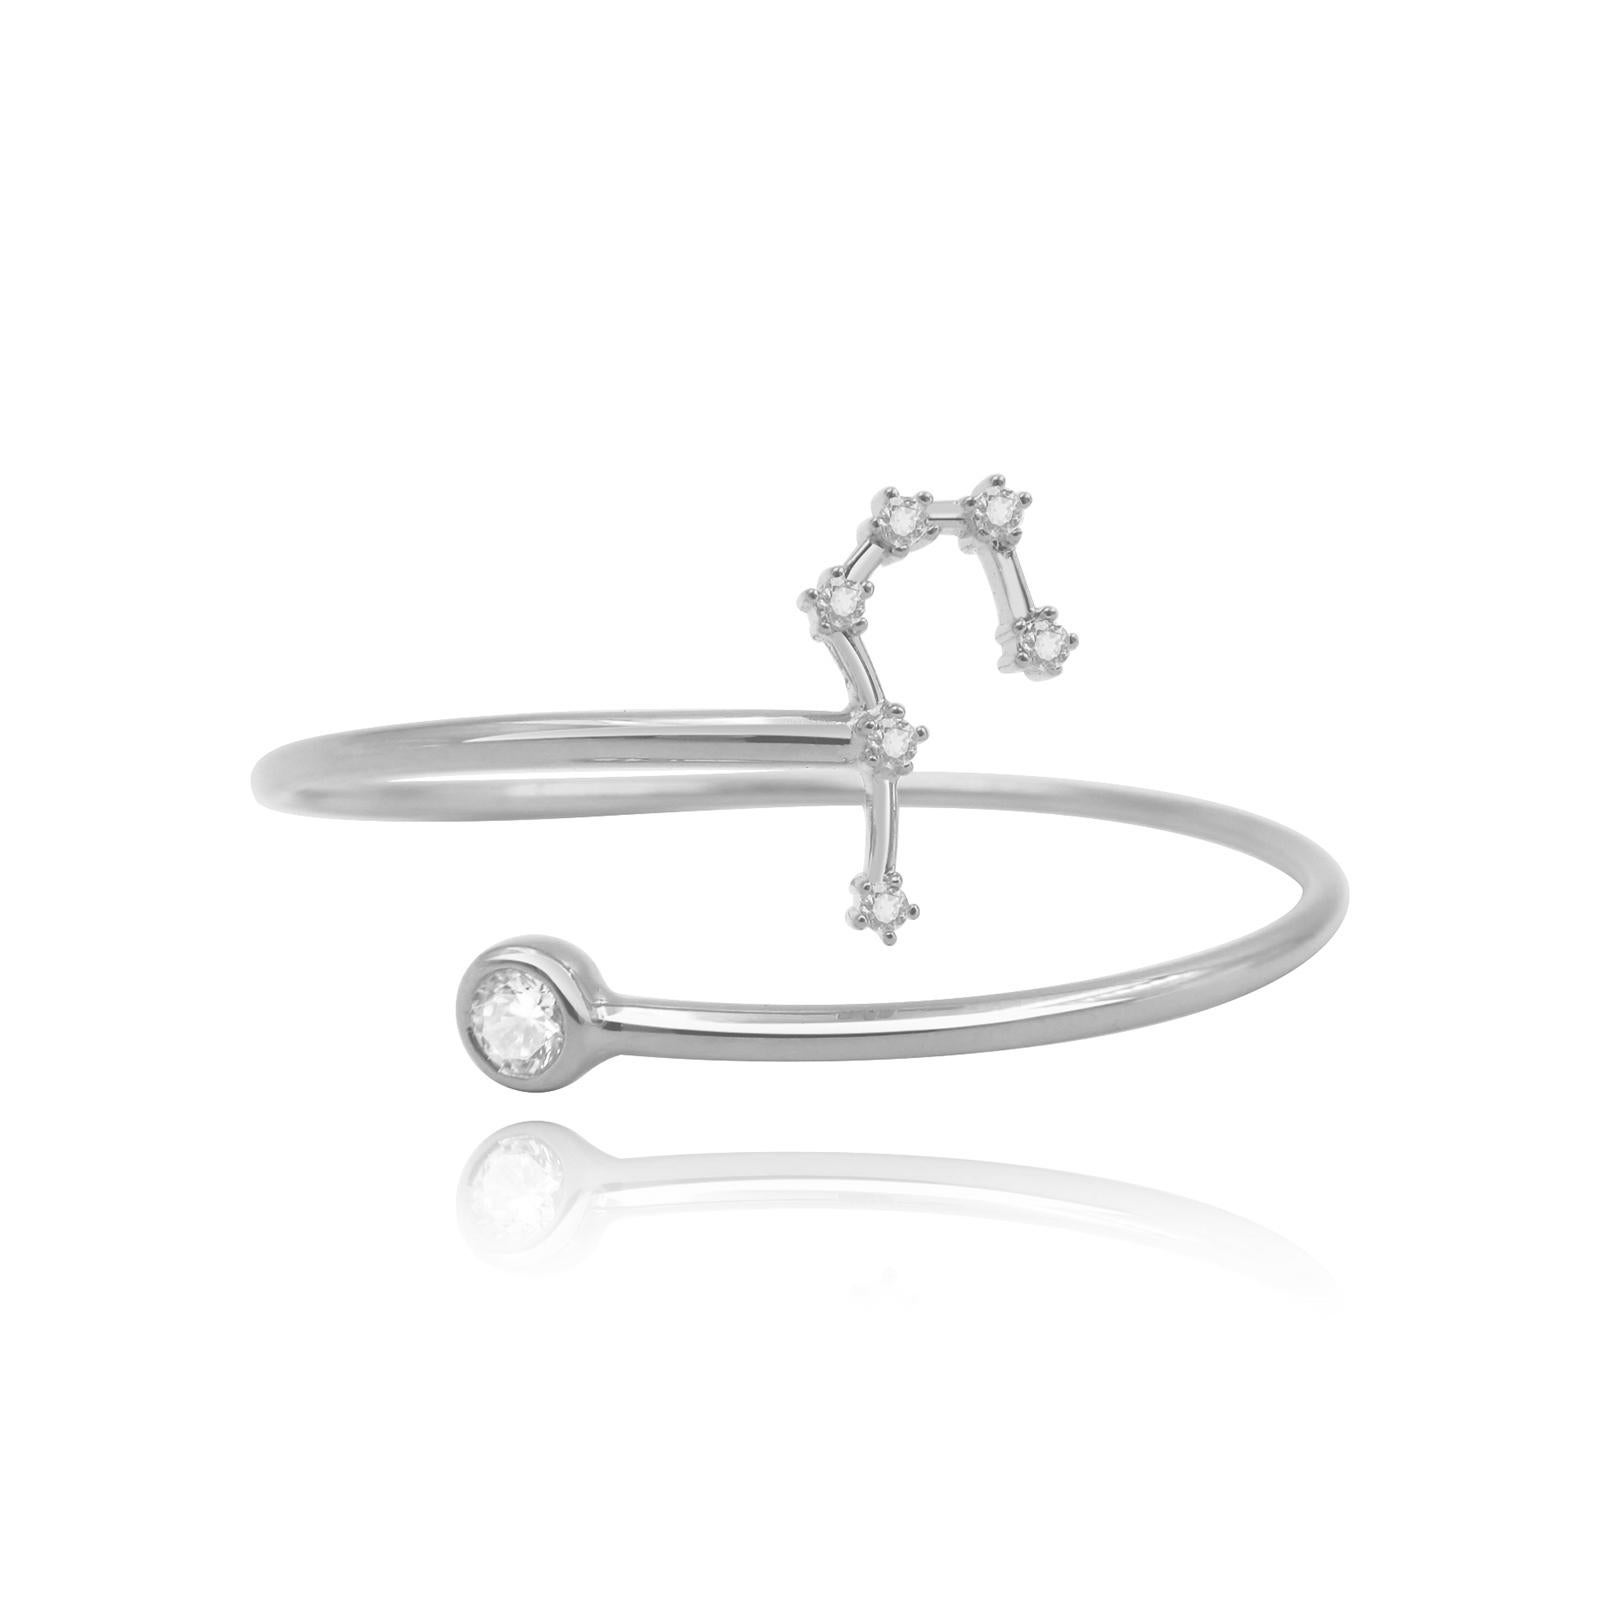 You are unique and your zodiac tells part of your story.  How your zodiac is displayed in the beautiful nighttime sky is what we want you to carry with you always. This cancer constellation wire bezel cuff shares a part of your personality with us